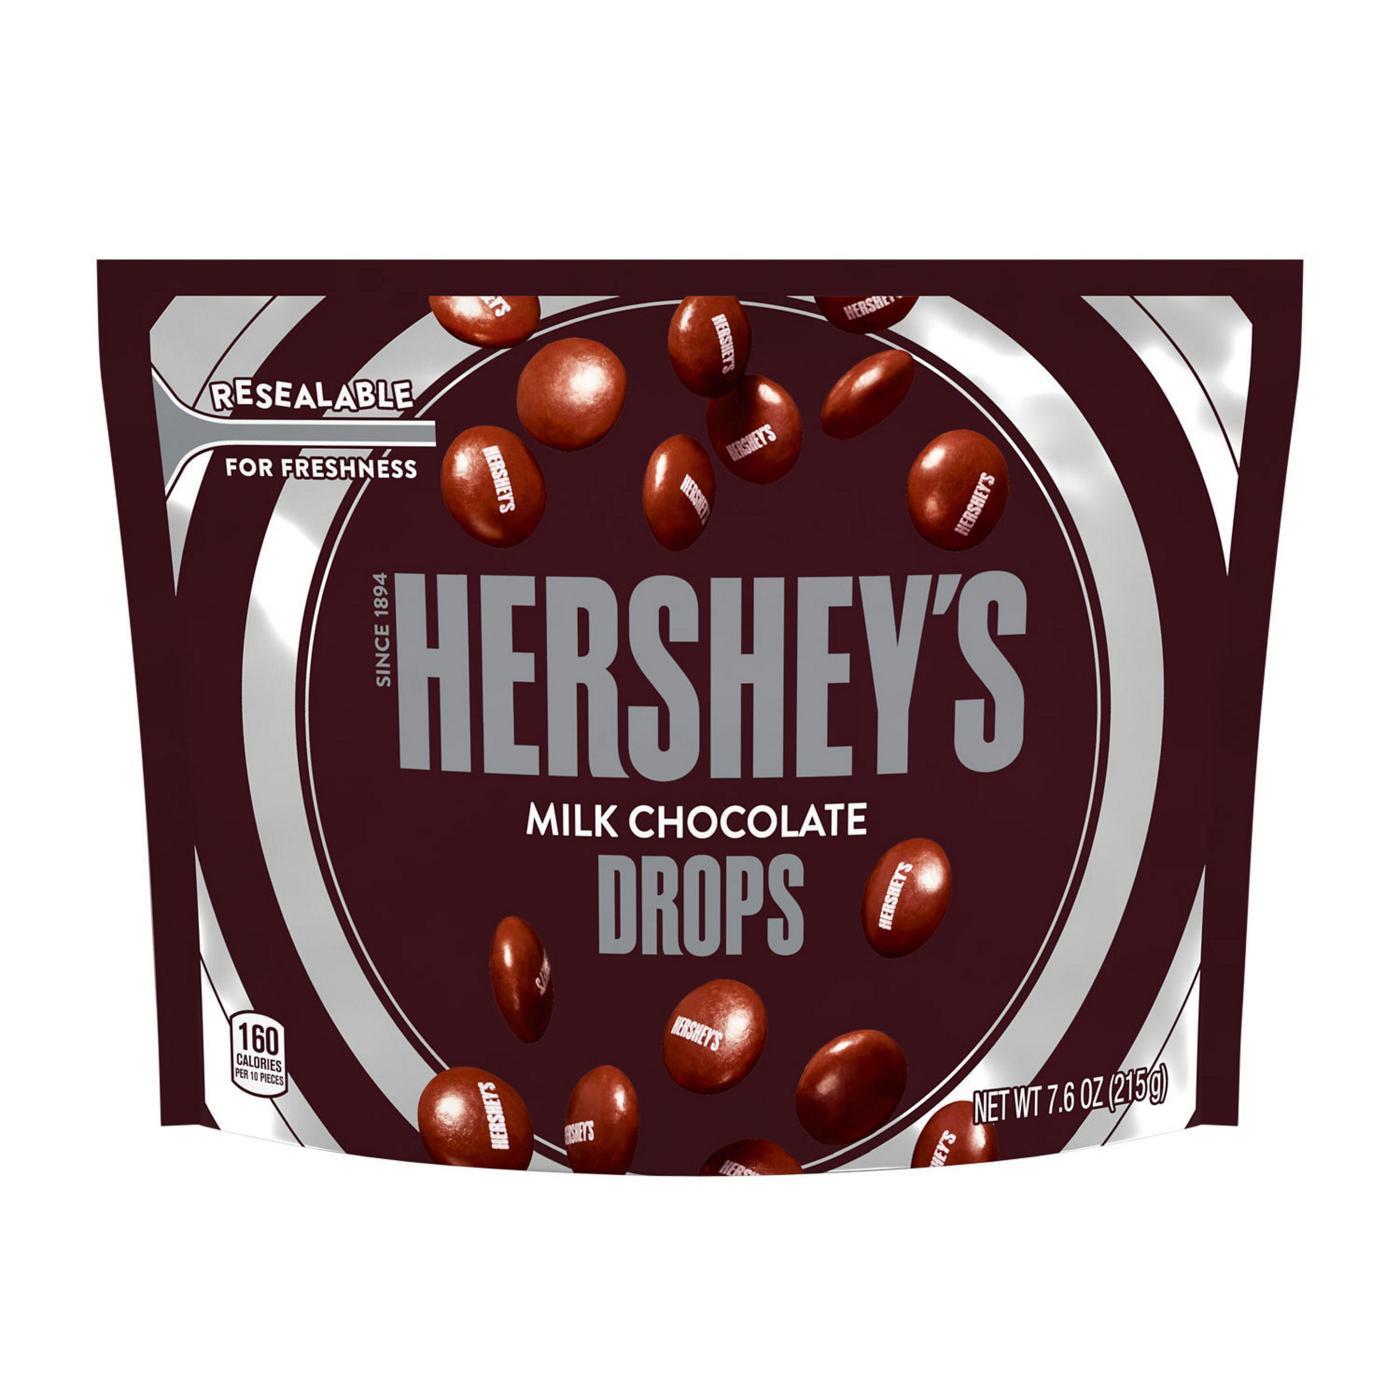 Hershey's Drops Milk Chocolate Candy; image 1 of 3